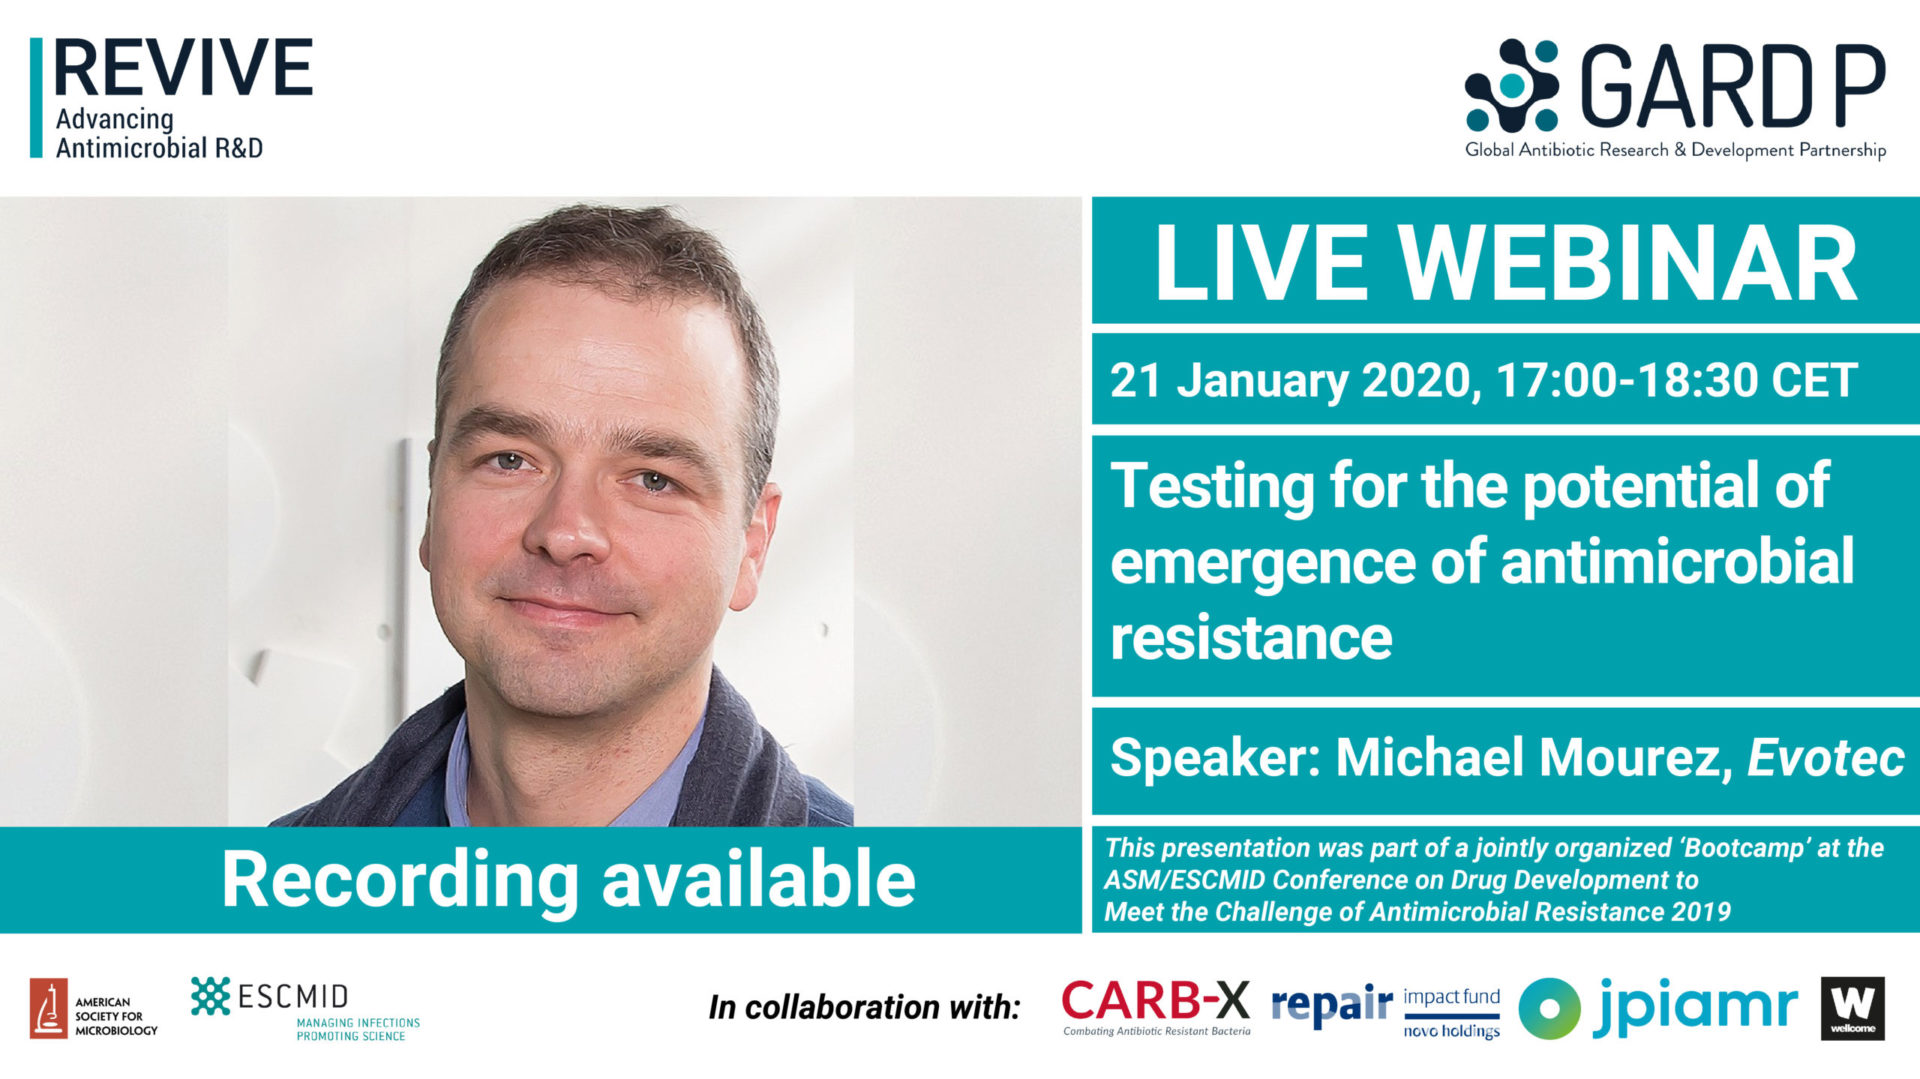 Testing for the potential of emergence of antimicrobial resistance